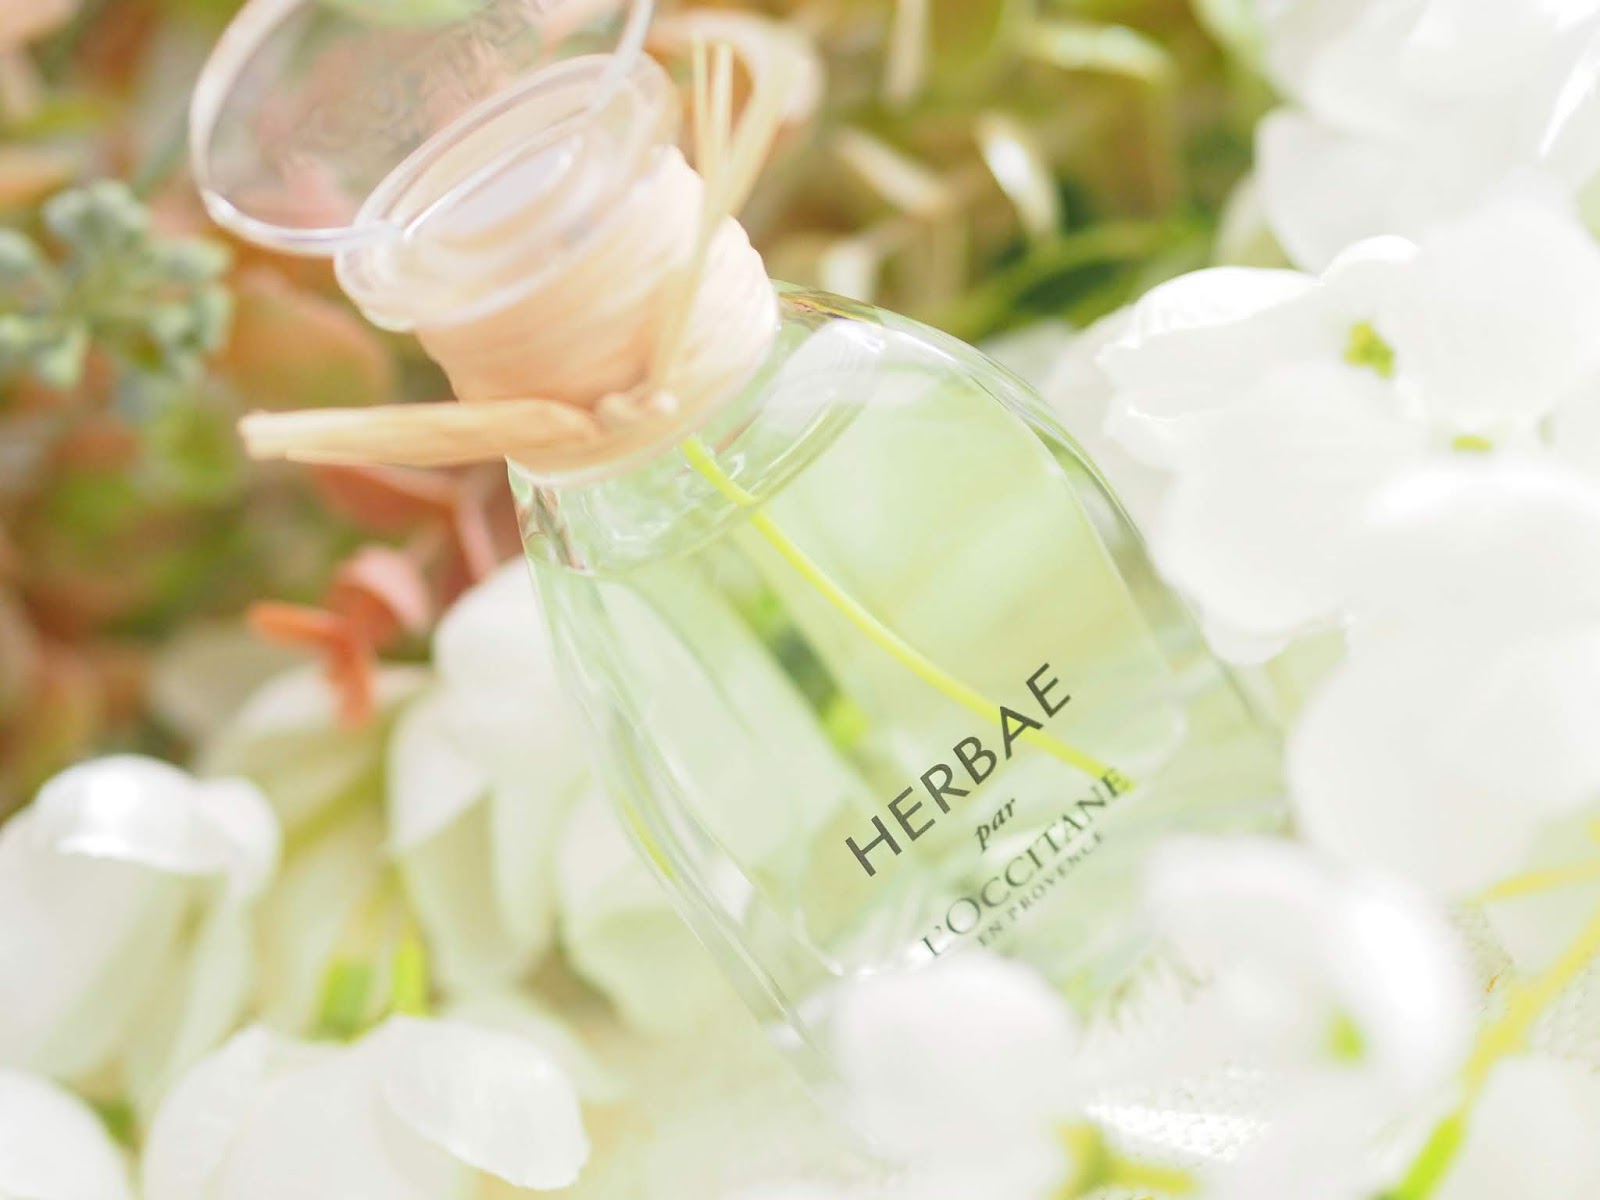 L'Occitane Herbae - the most perfect scent for Spring!